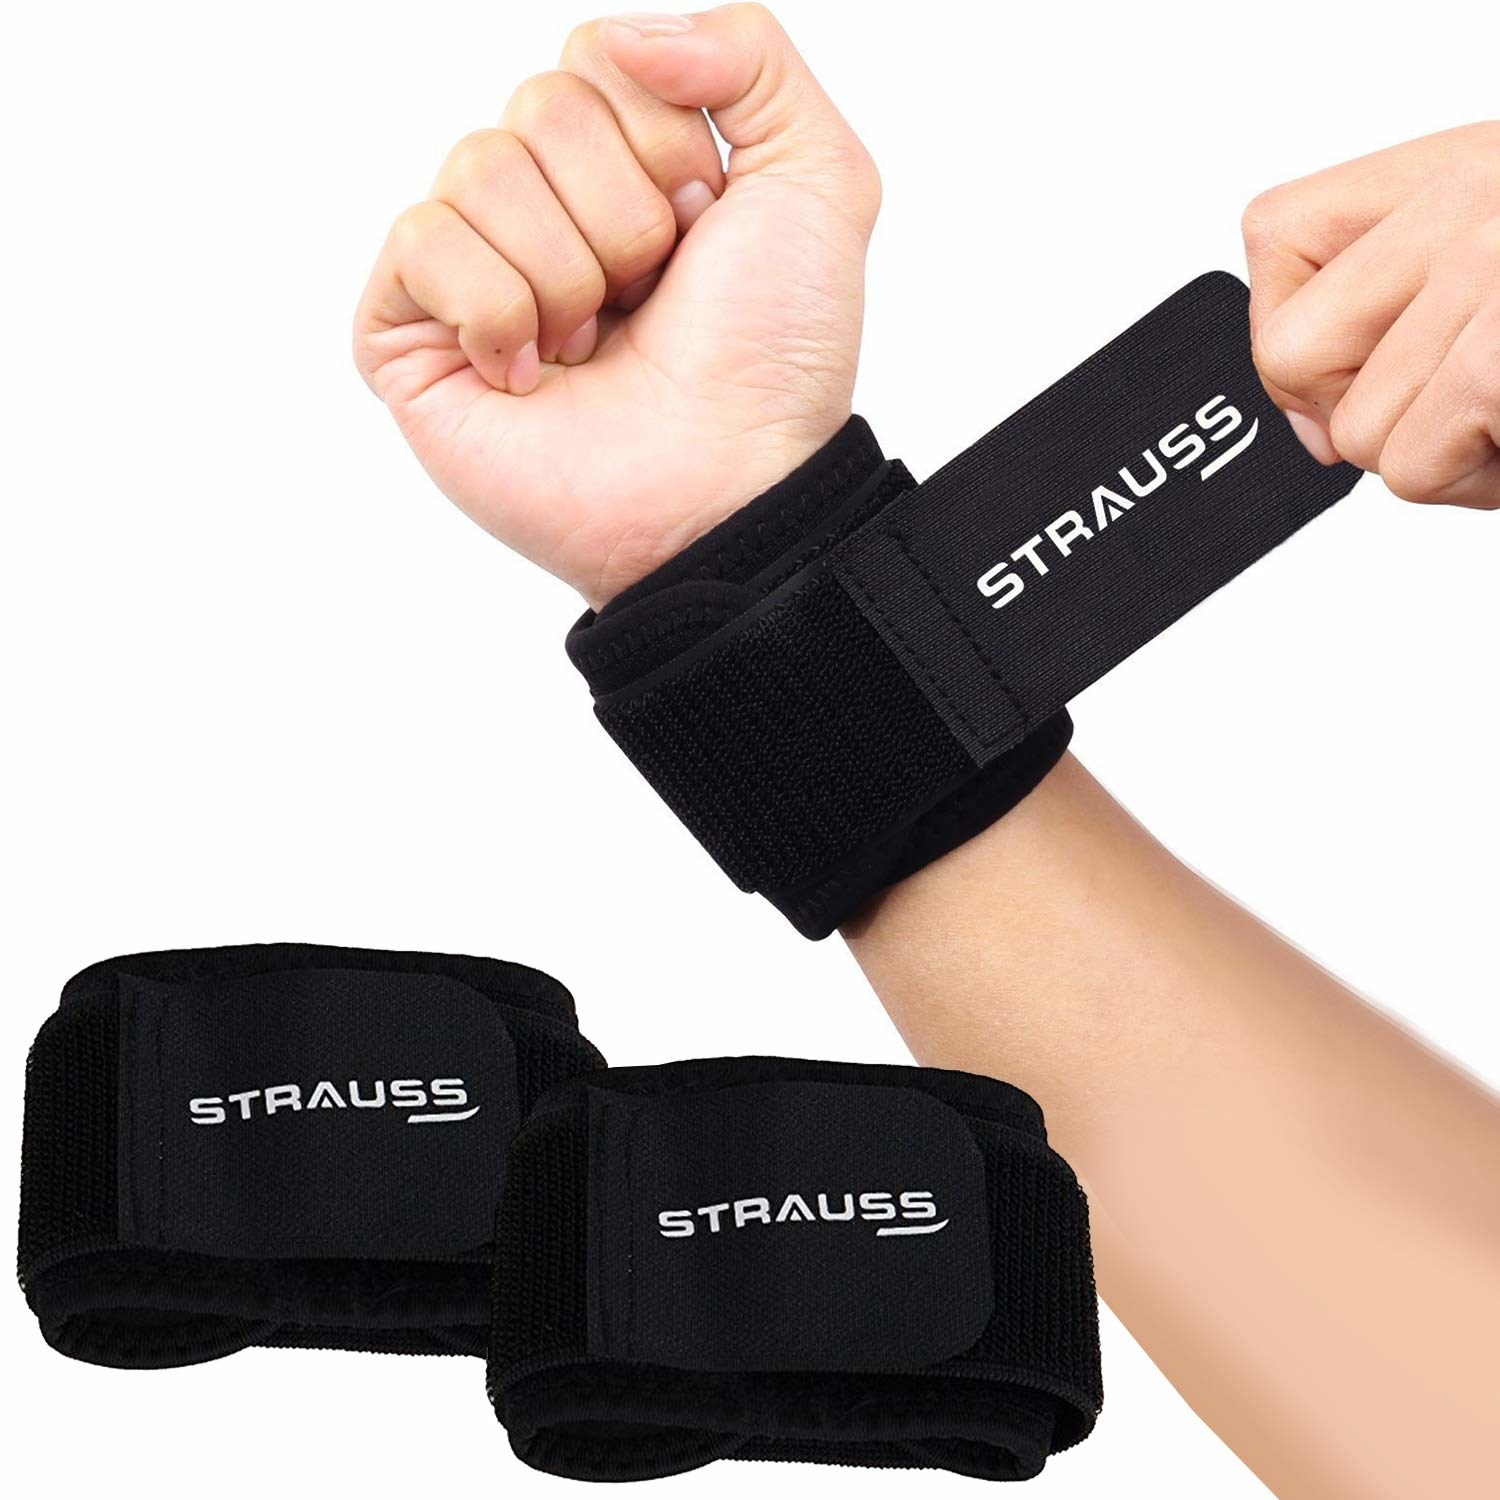 A person tightening a support band around their wrist, next to an image of two rolled up support bands